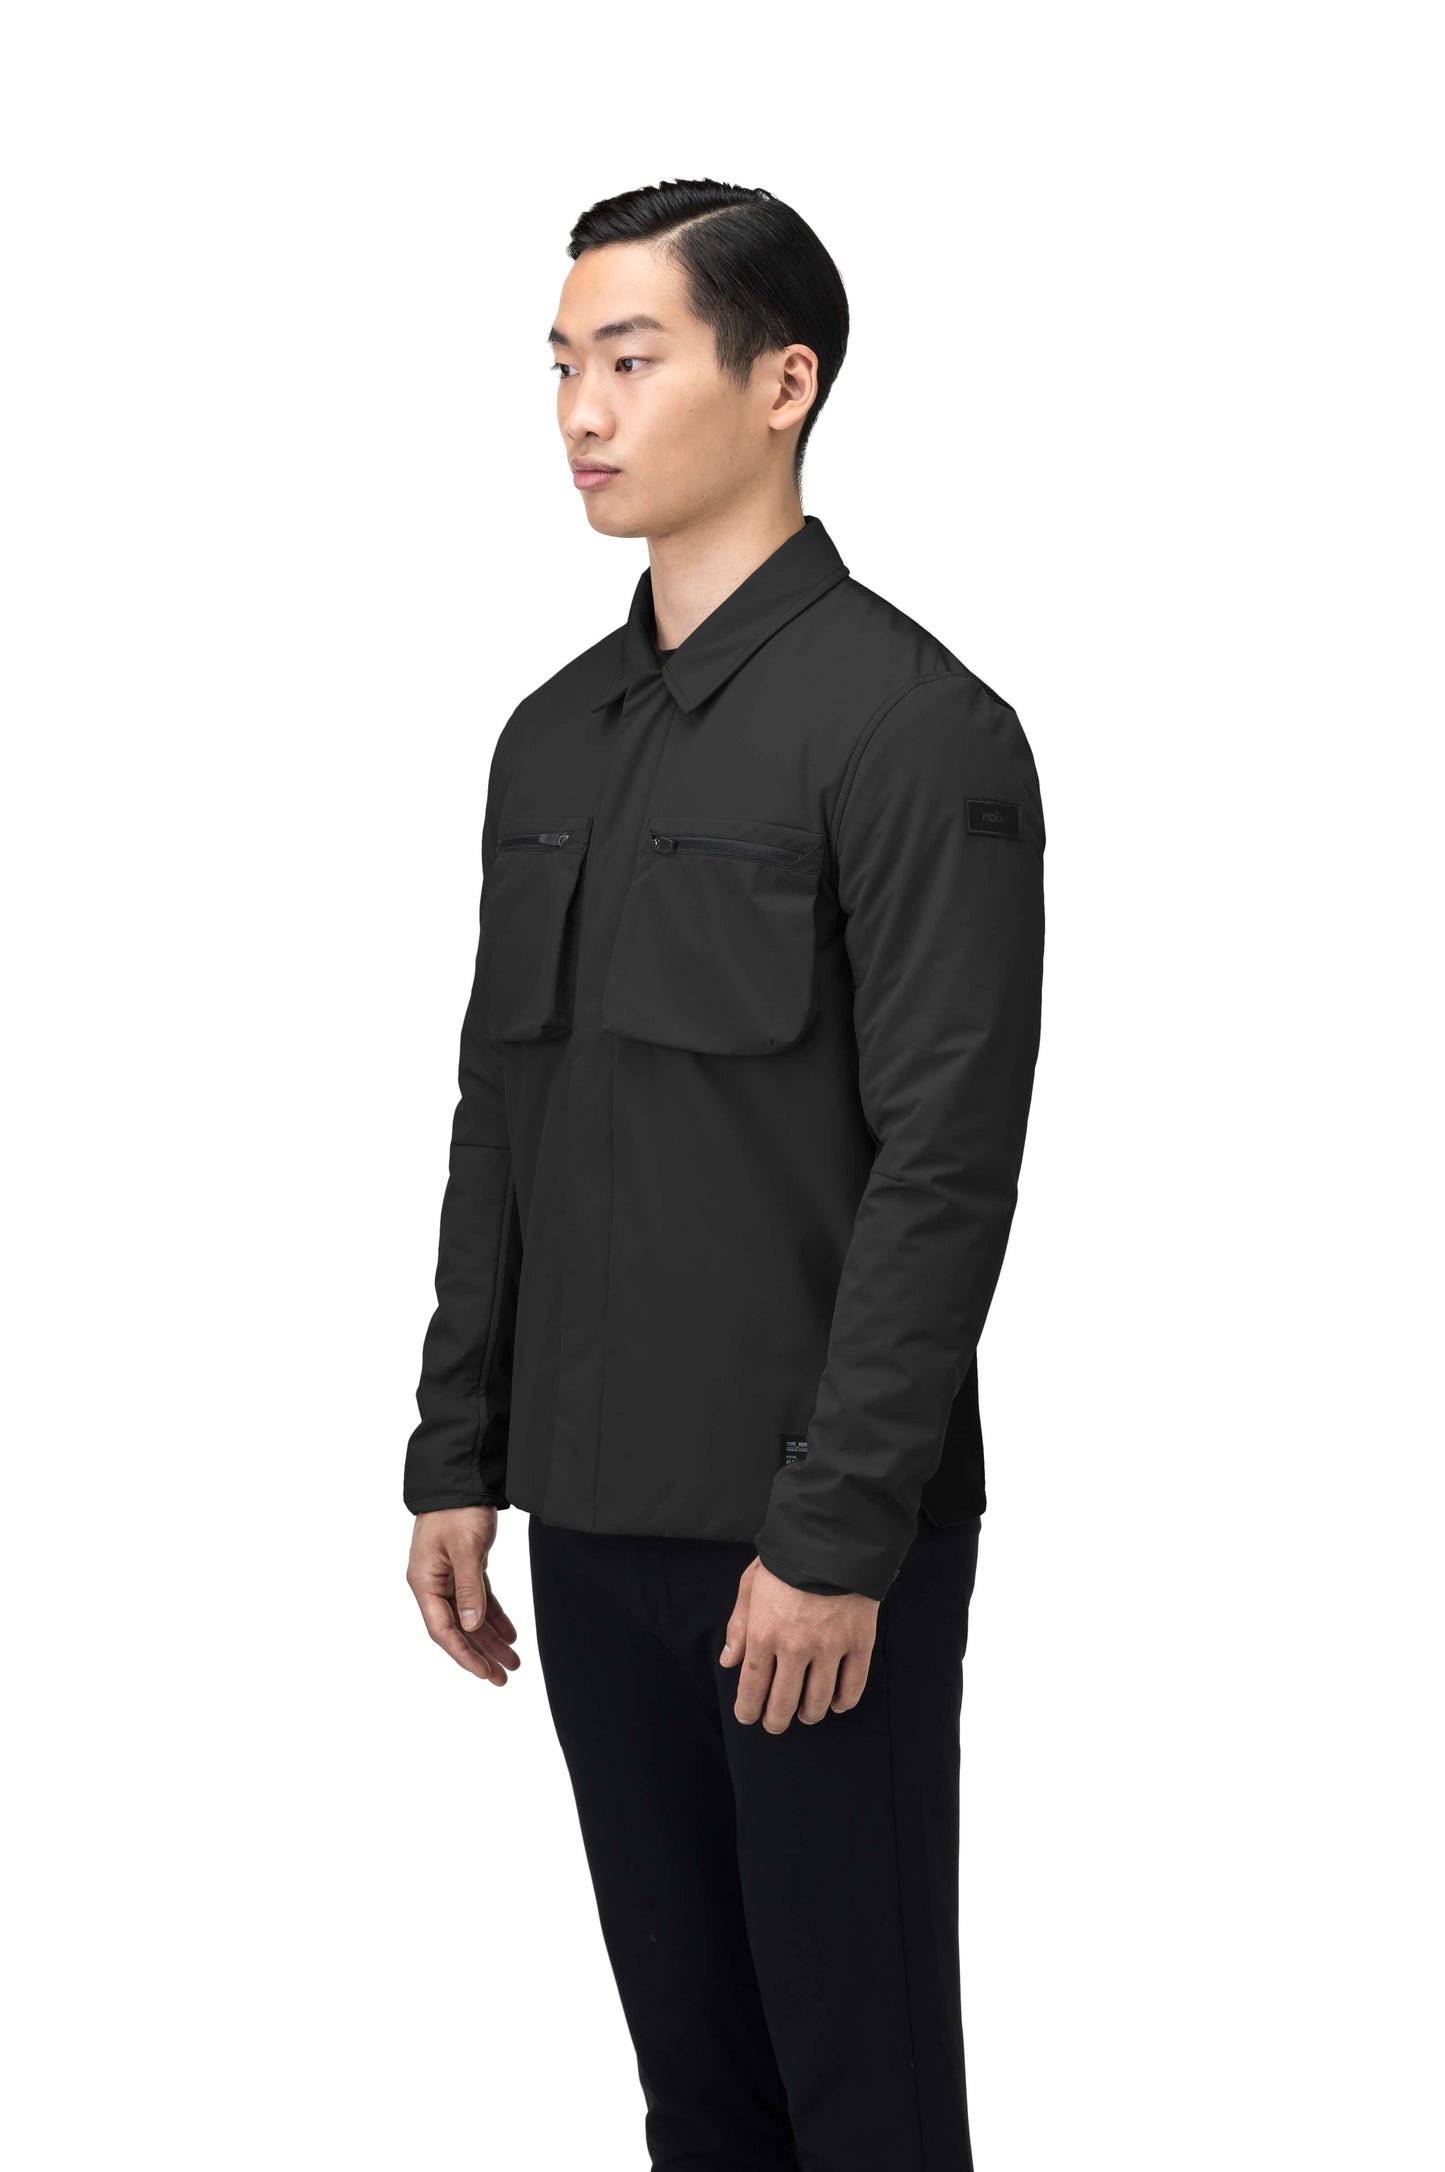 Ander Men's Mid Layer Shirt in hip length, PrimaLoft Gold Insulation Active+, 3-Ply Micro Denier front and 4-Way Durable Stretch Weave back, zipper chest pockets, snap button wind flap, and snap button cuffs, in Black